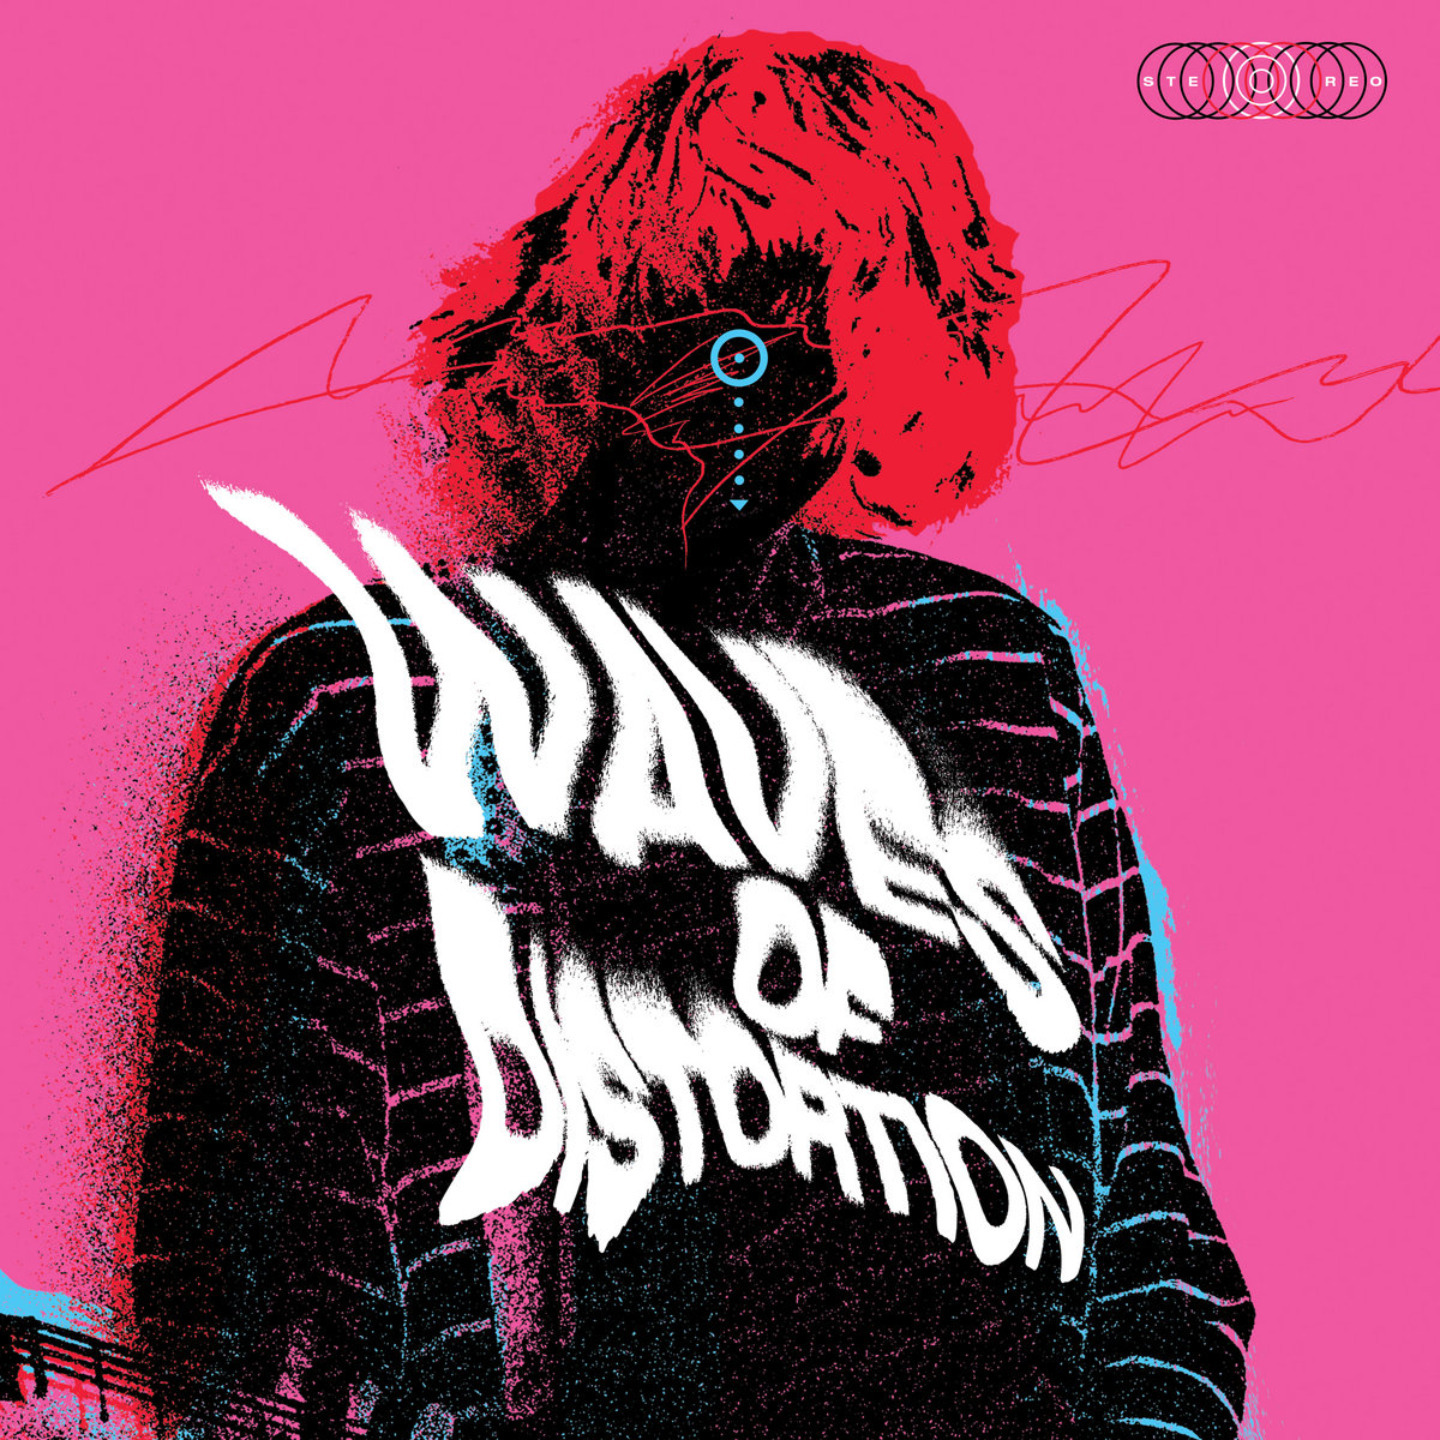 V/A - Waves Of Distortion (The Best of Shoegaze 1990-2022) 2xLP (Red Vinyl)